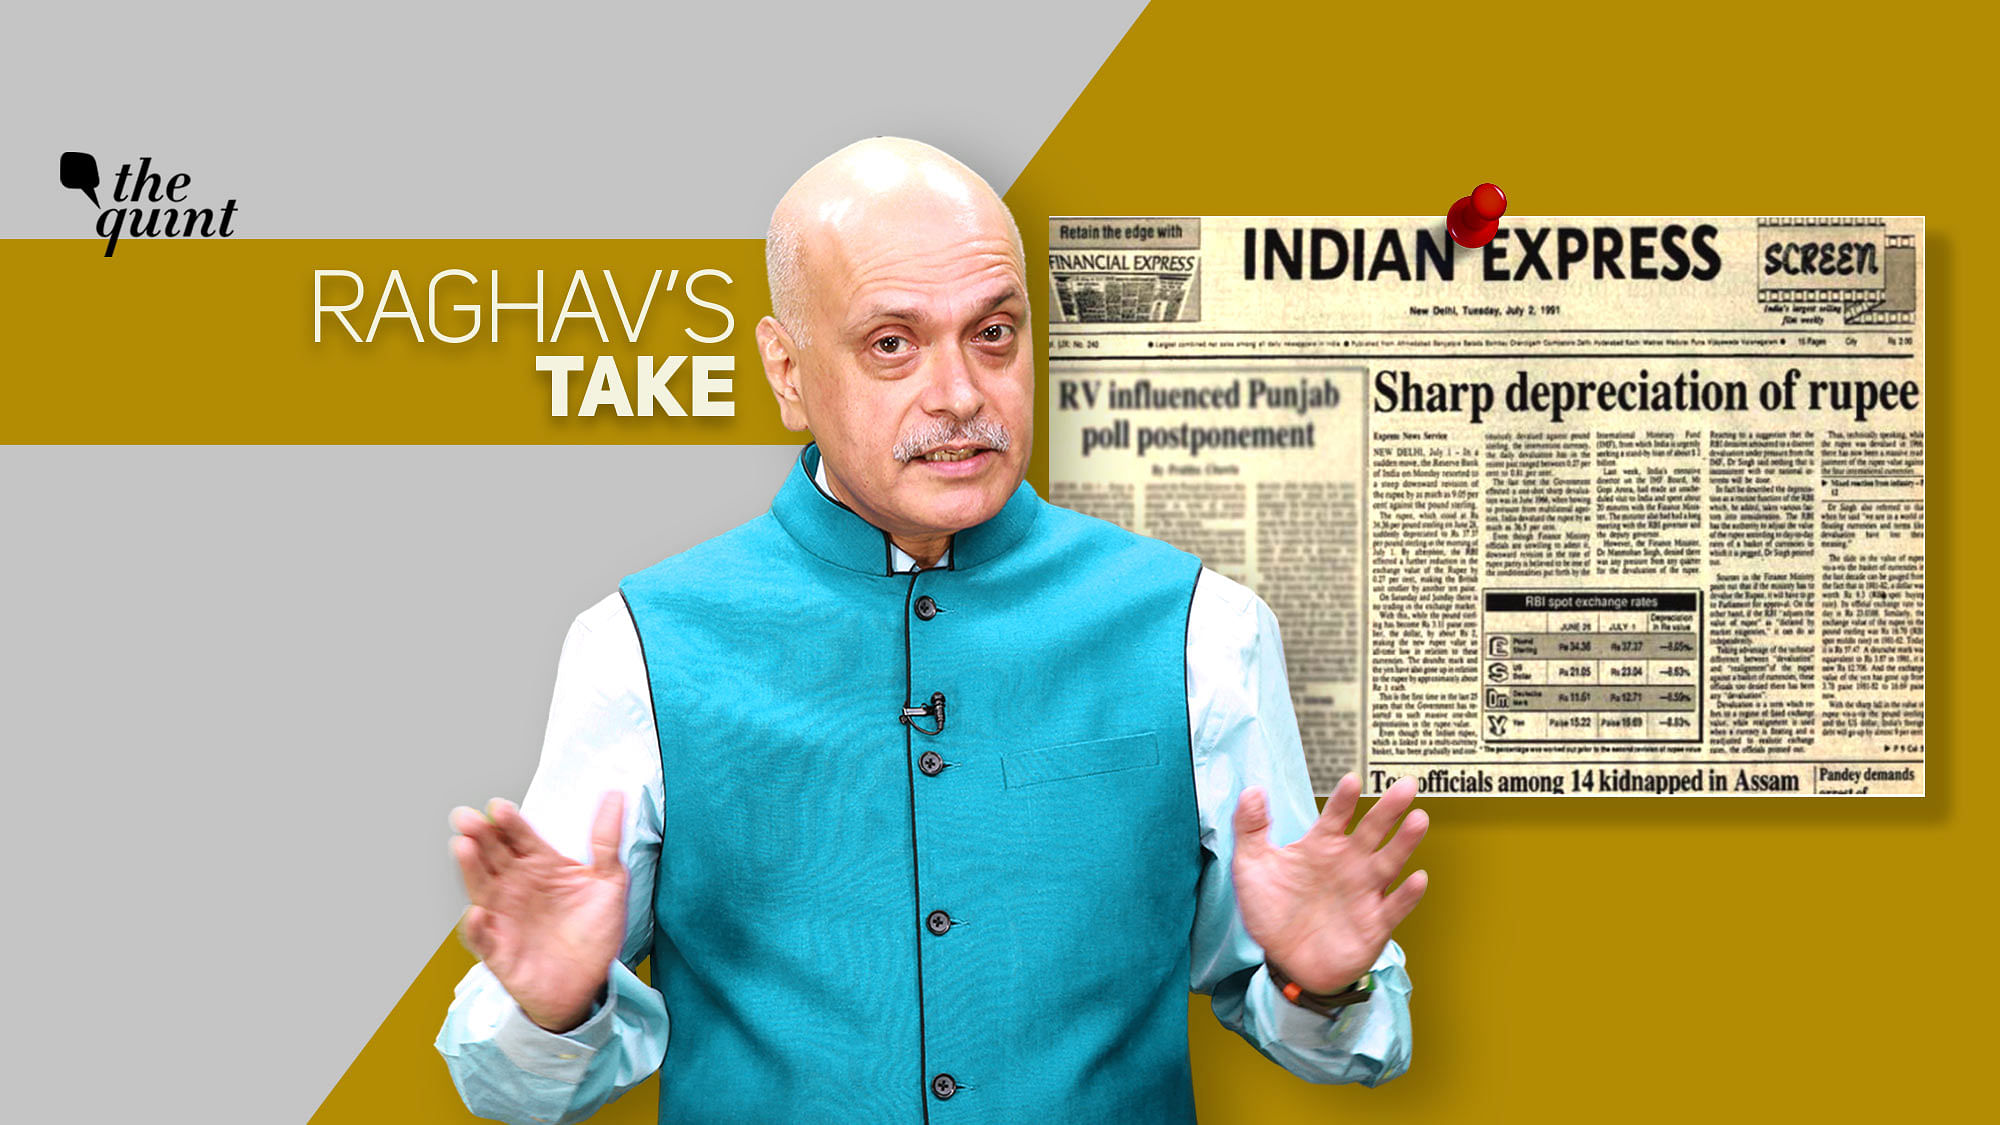 Image of The Quint’s Founder-Editor Raghav Bahl, and an archival newspaper clipping from the 1991 economic crisis, used for representational purposes.